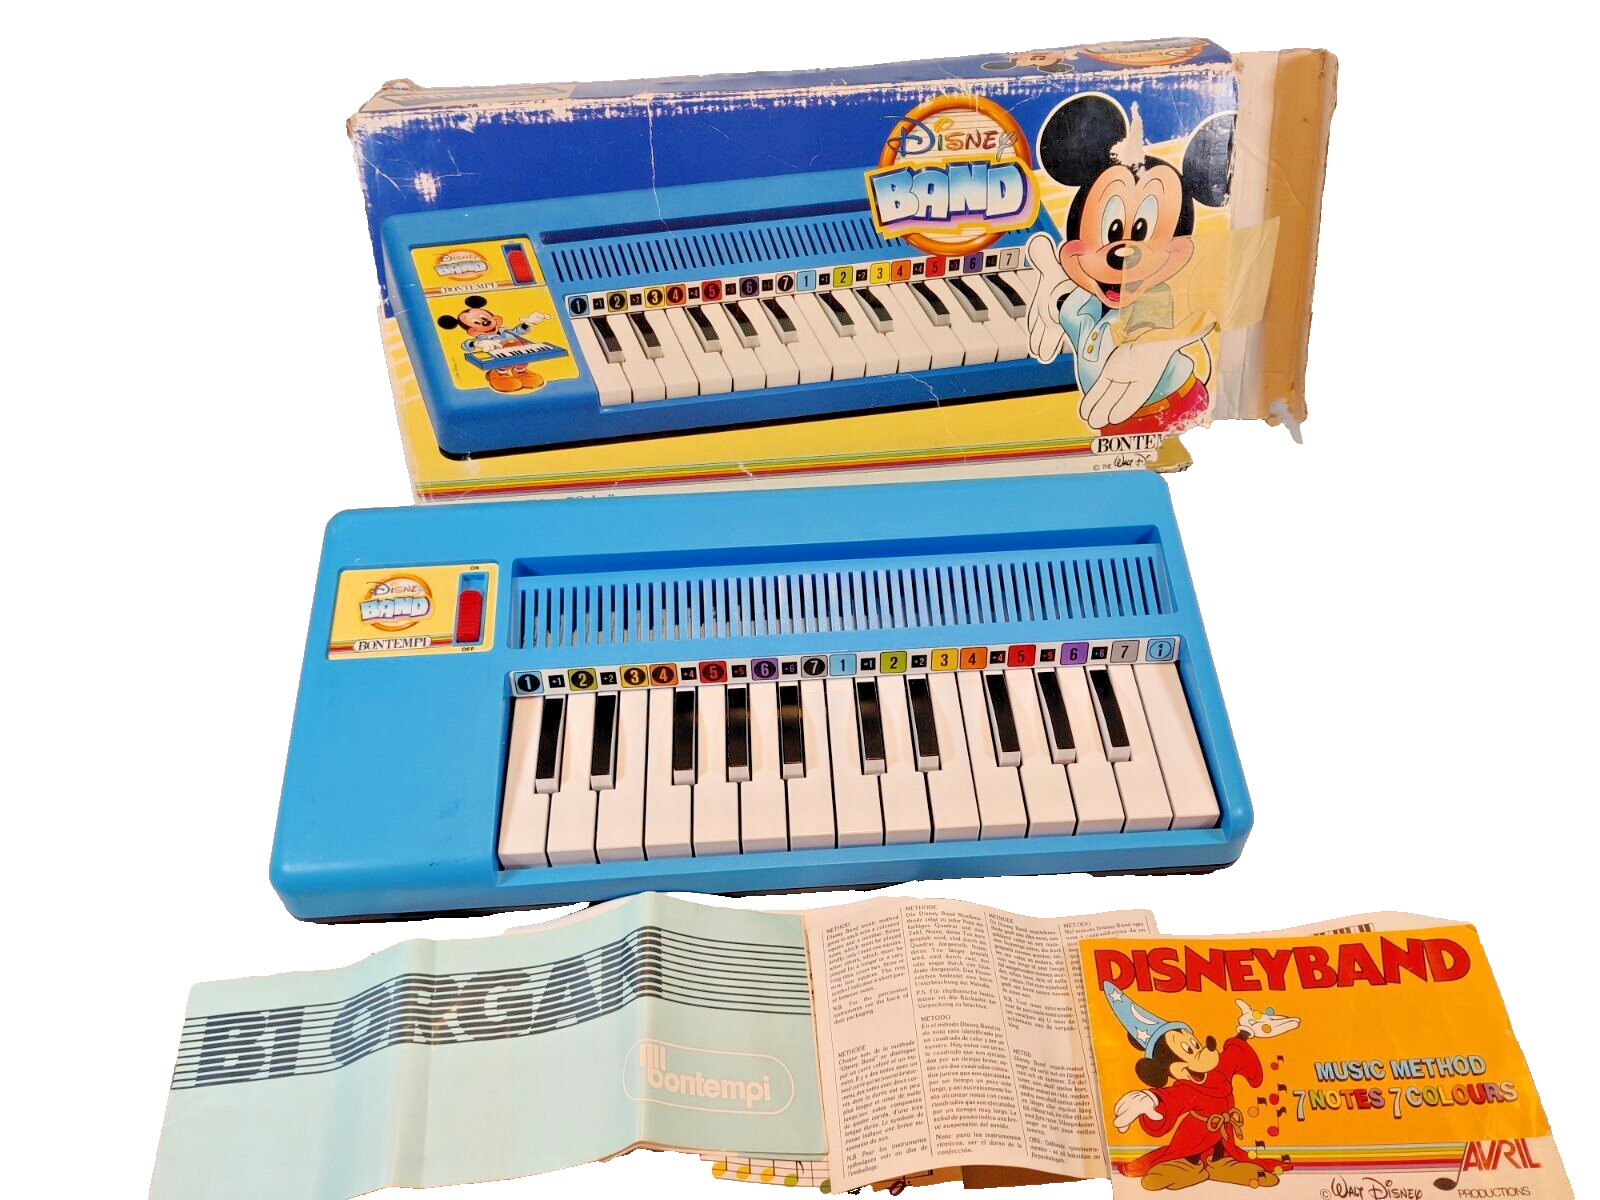 VINTAGE DISNEY BAND MICKEY MOUSE REED ORGAN 7 NOTE BONTEMPI MADE IN ITALY 80s - £31.84 GBP